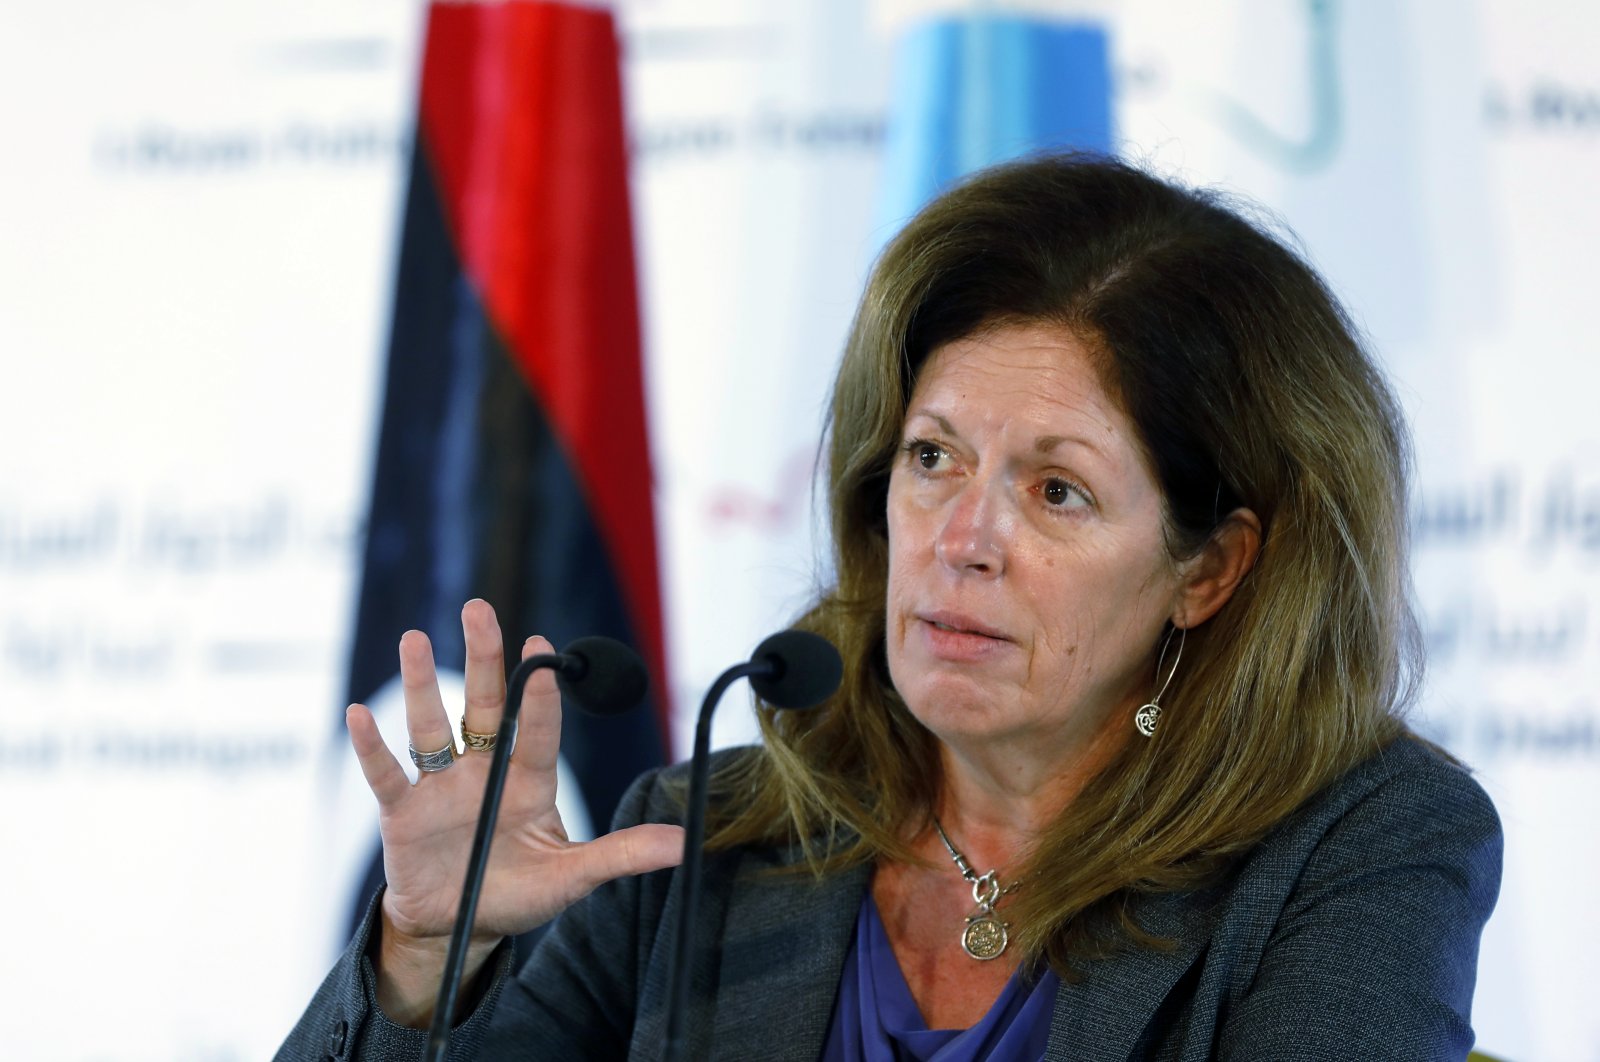 Stephanie Williams, acting special representative of the secretary-general and head of the United Nations Support Mission in Libya, speaks during a news conference in Tunis, Tunisia, Nov. 15, 2020. (AP Photo)